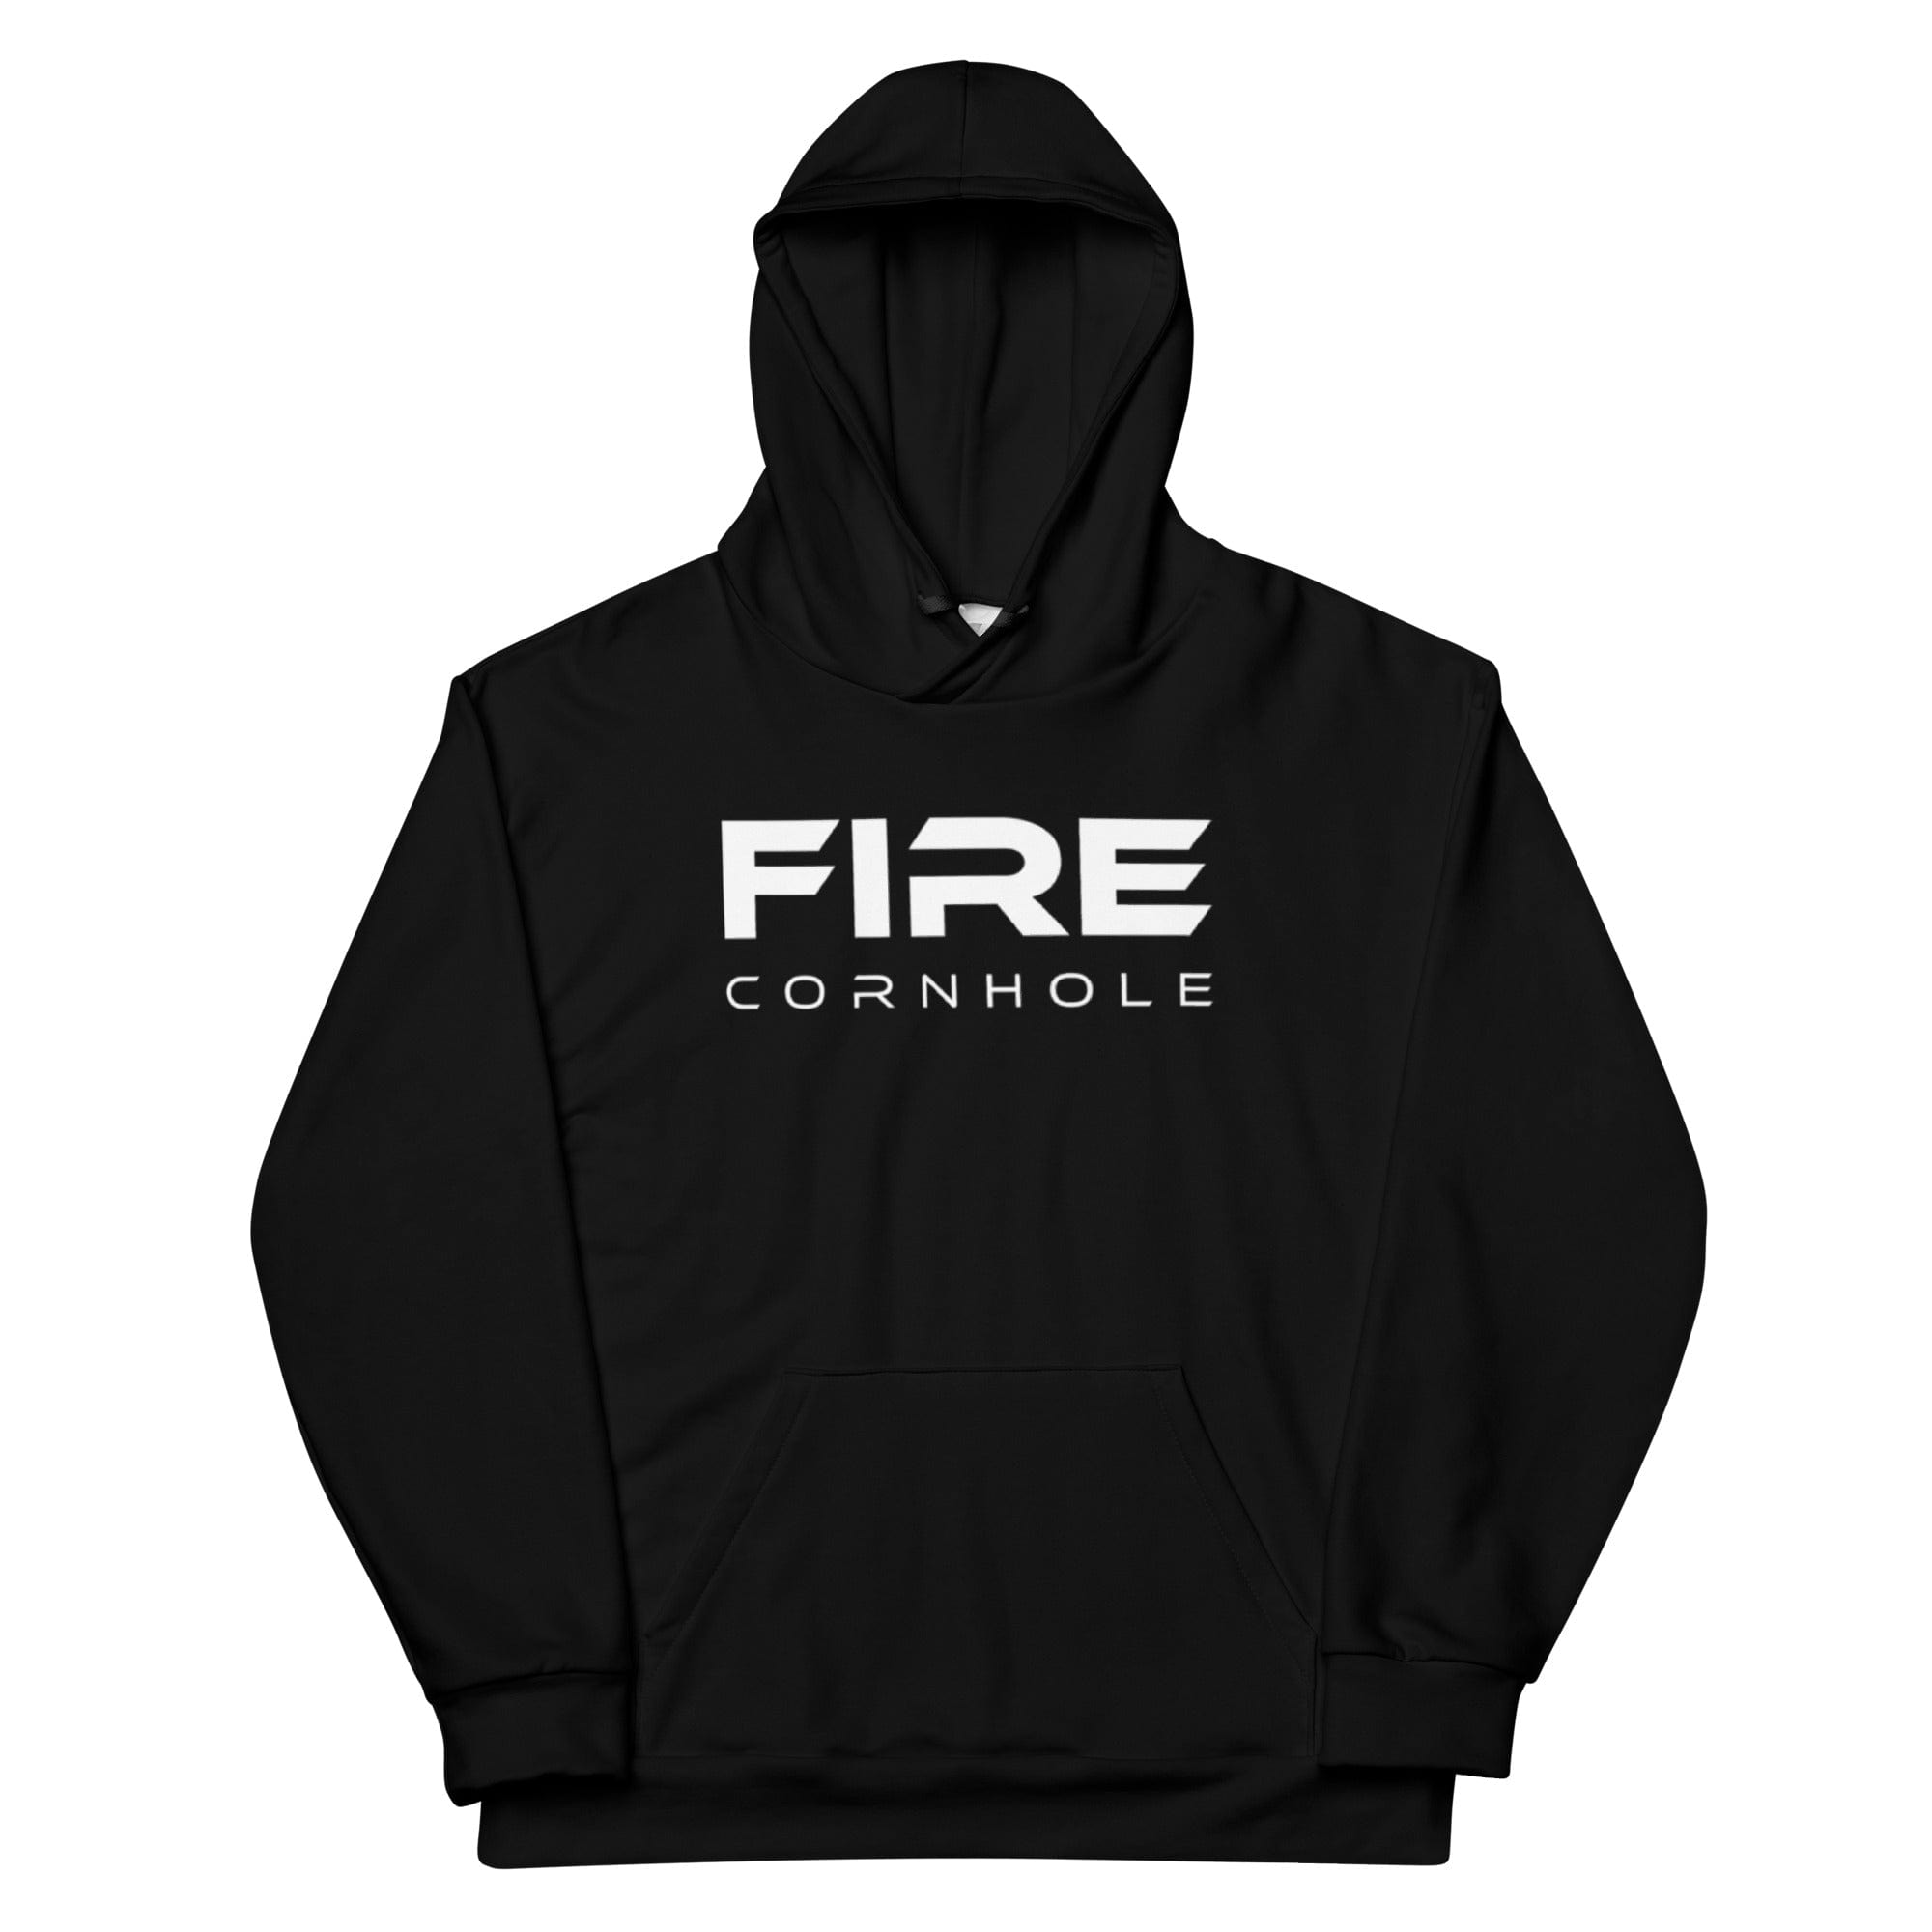 Front view of black unisex fleece hoodie with Fire Cornhole logo in white